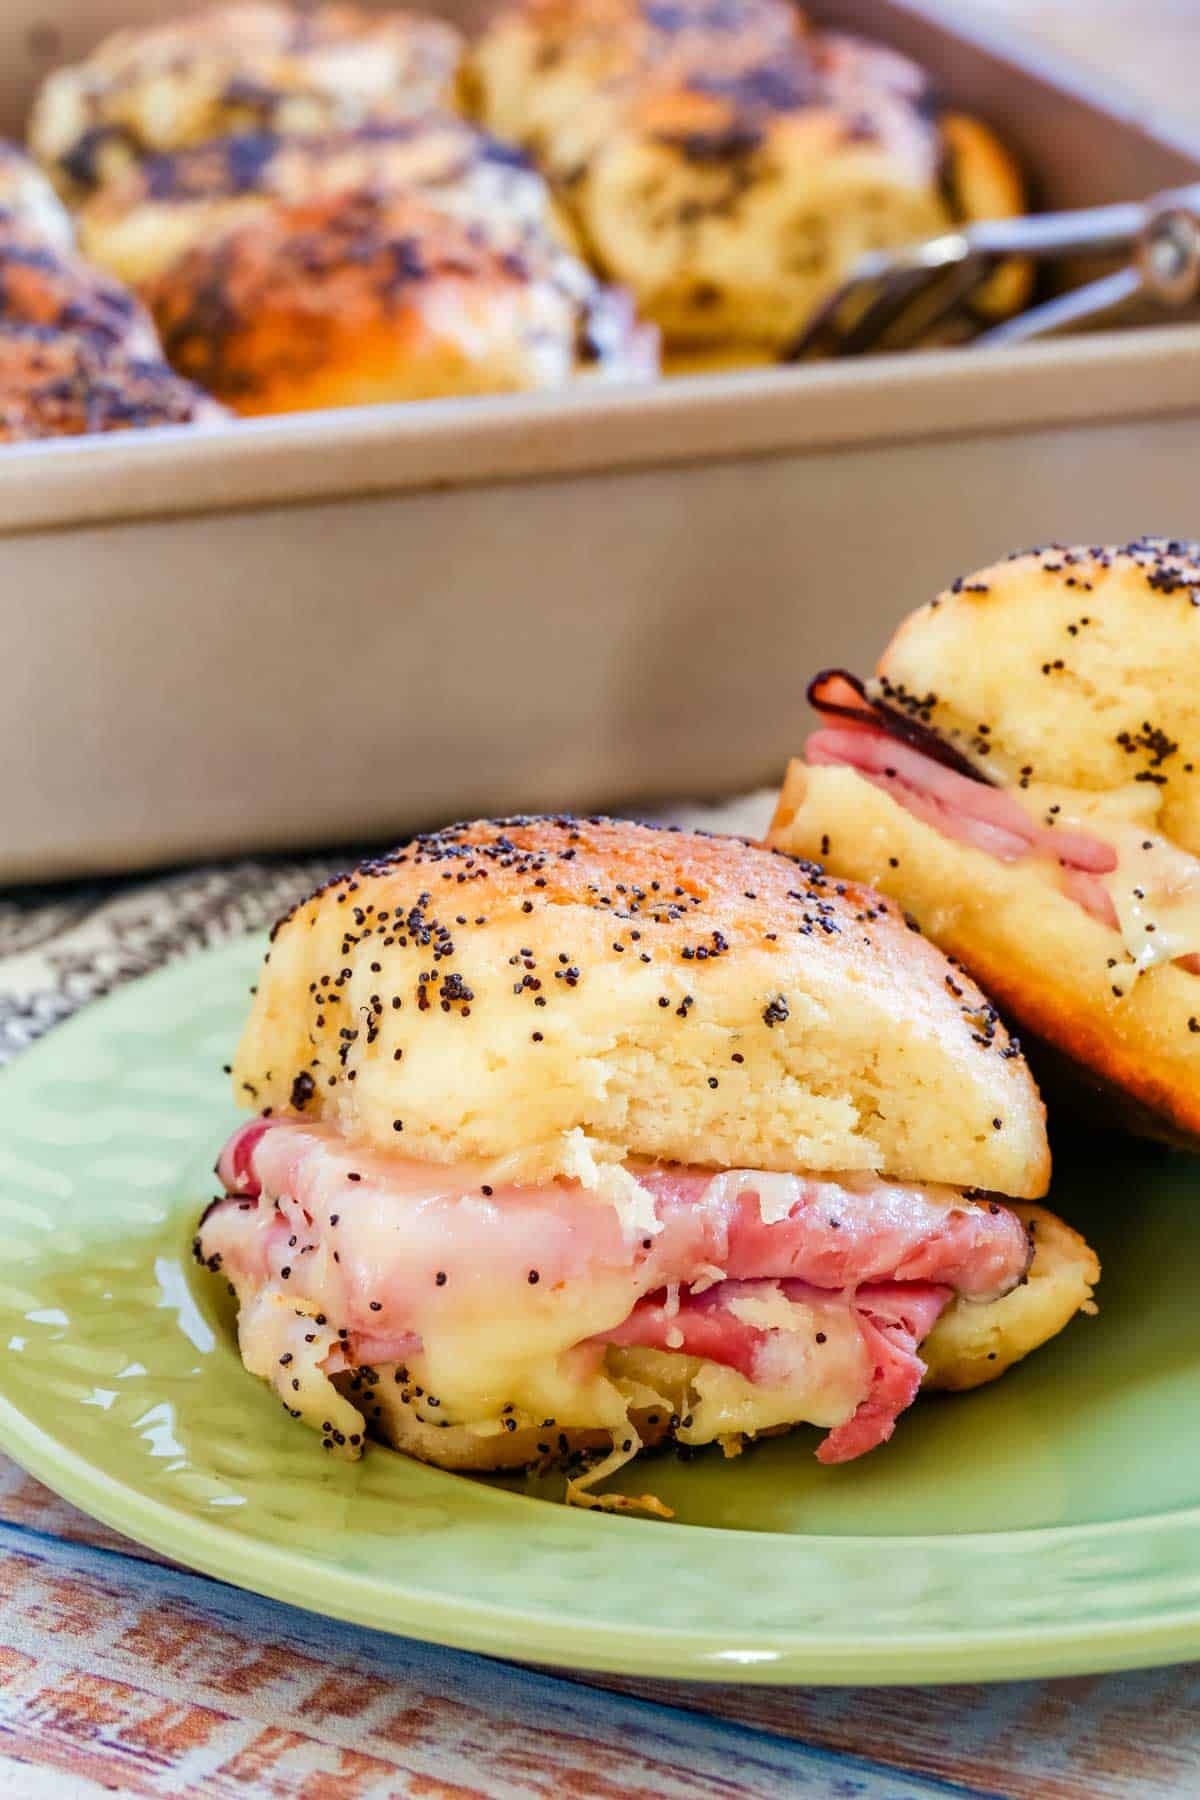 Scrumptious Ham and Cheese Sliders on a green plate.